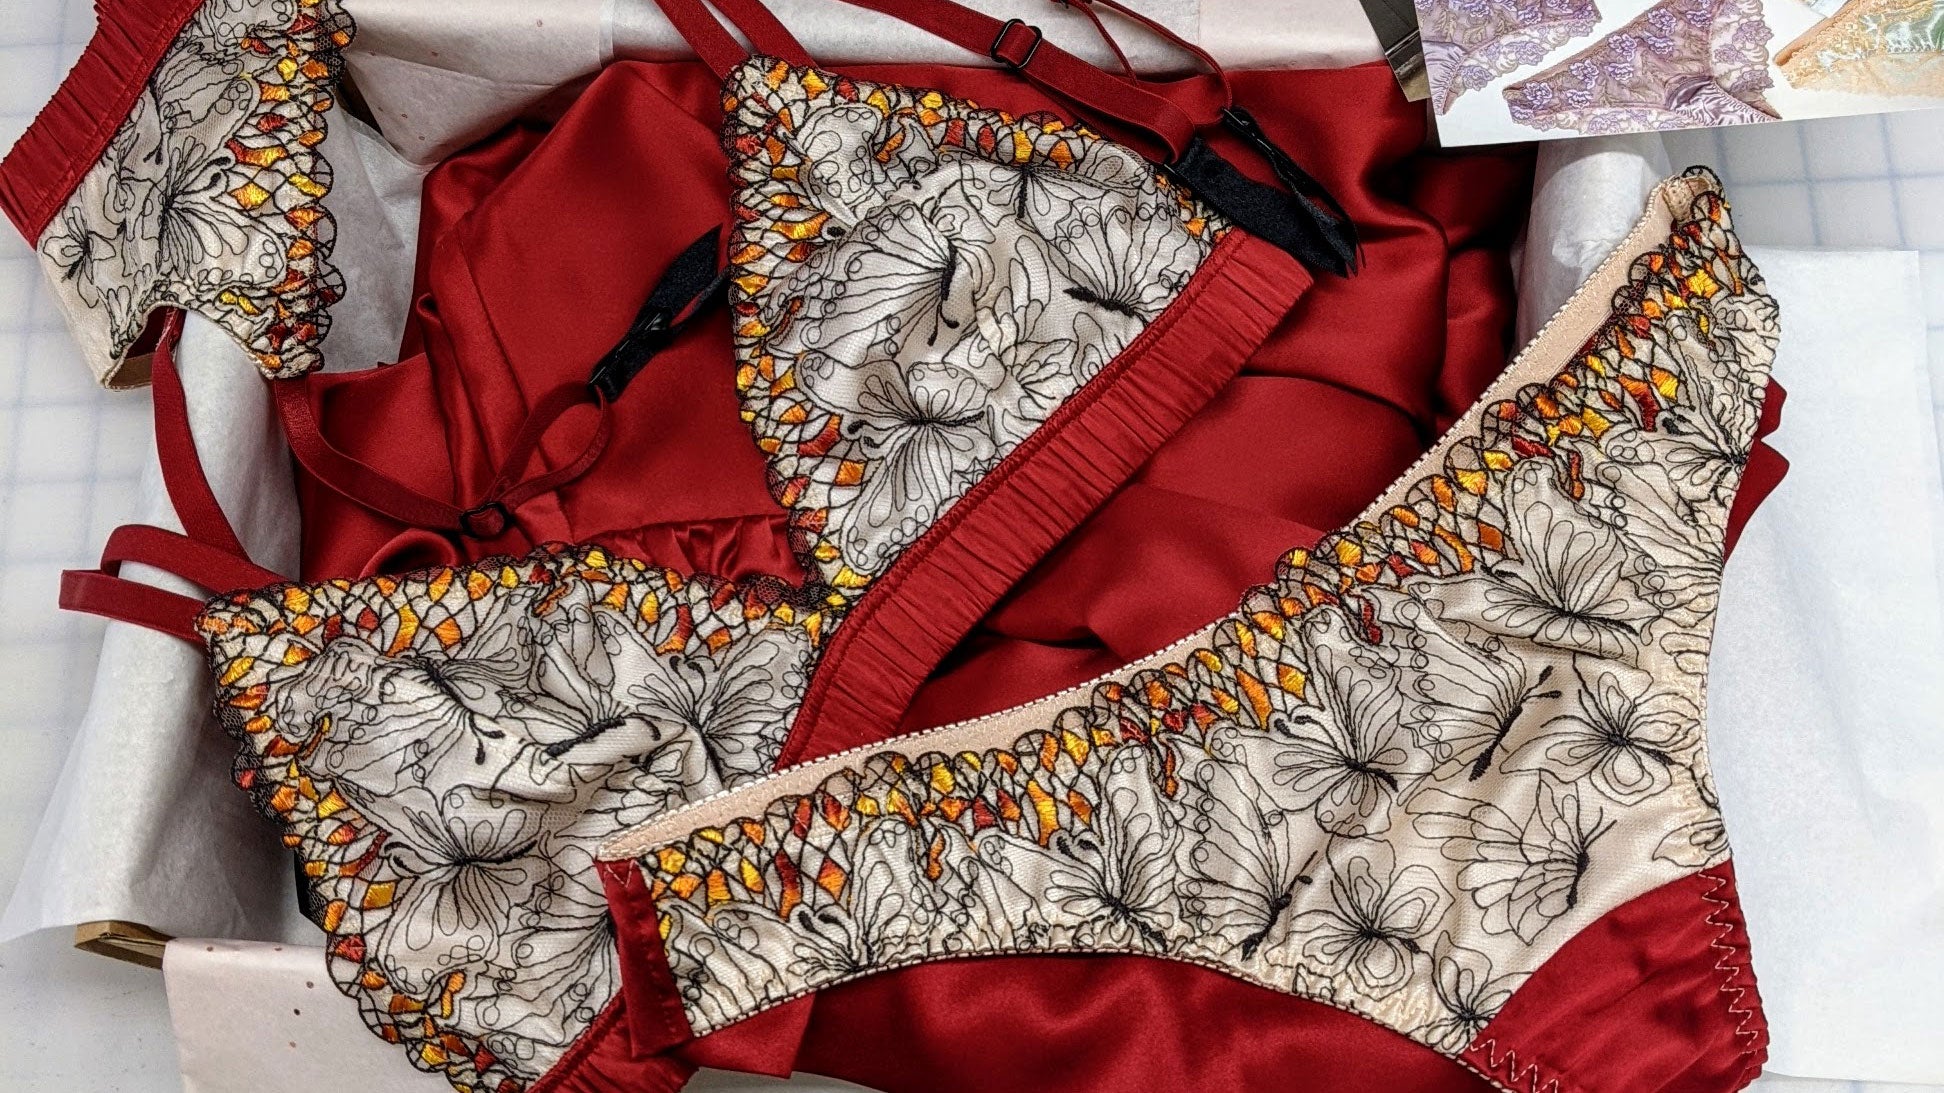 Treat Yourself to This African Inspired and Made Luxury Lingerie Collection